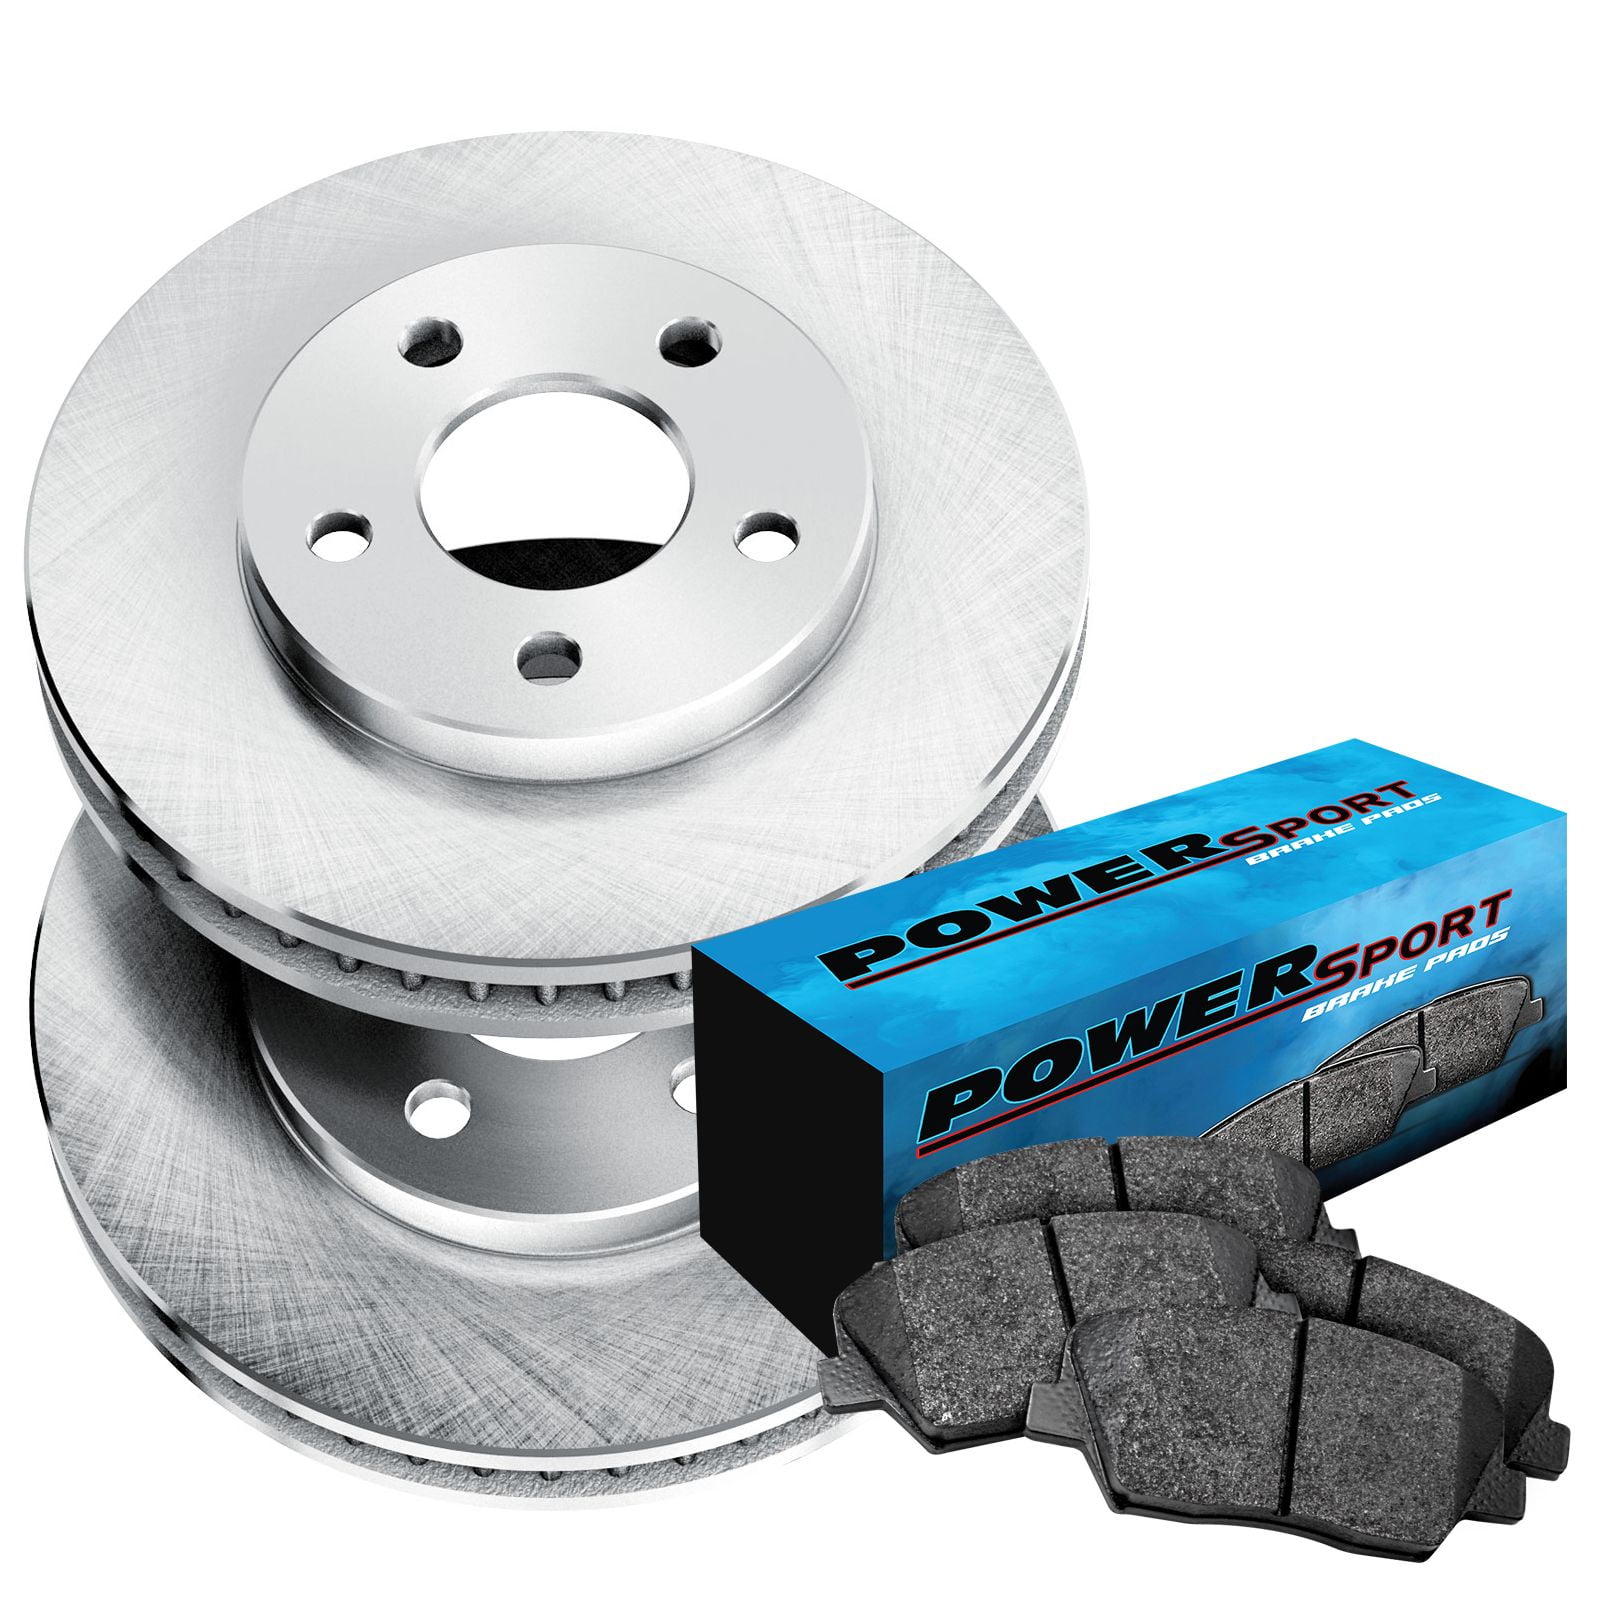 Front Replacement Brake Rotors Disc and Ceramic Pads For Granada,Monarch